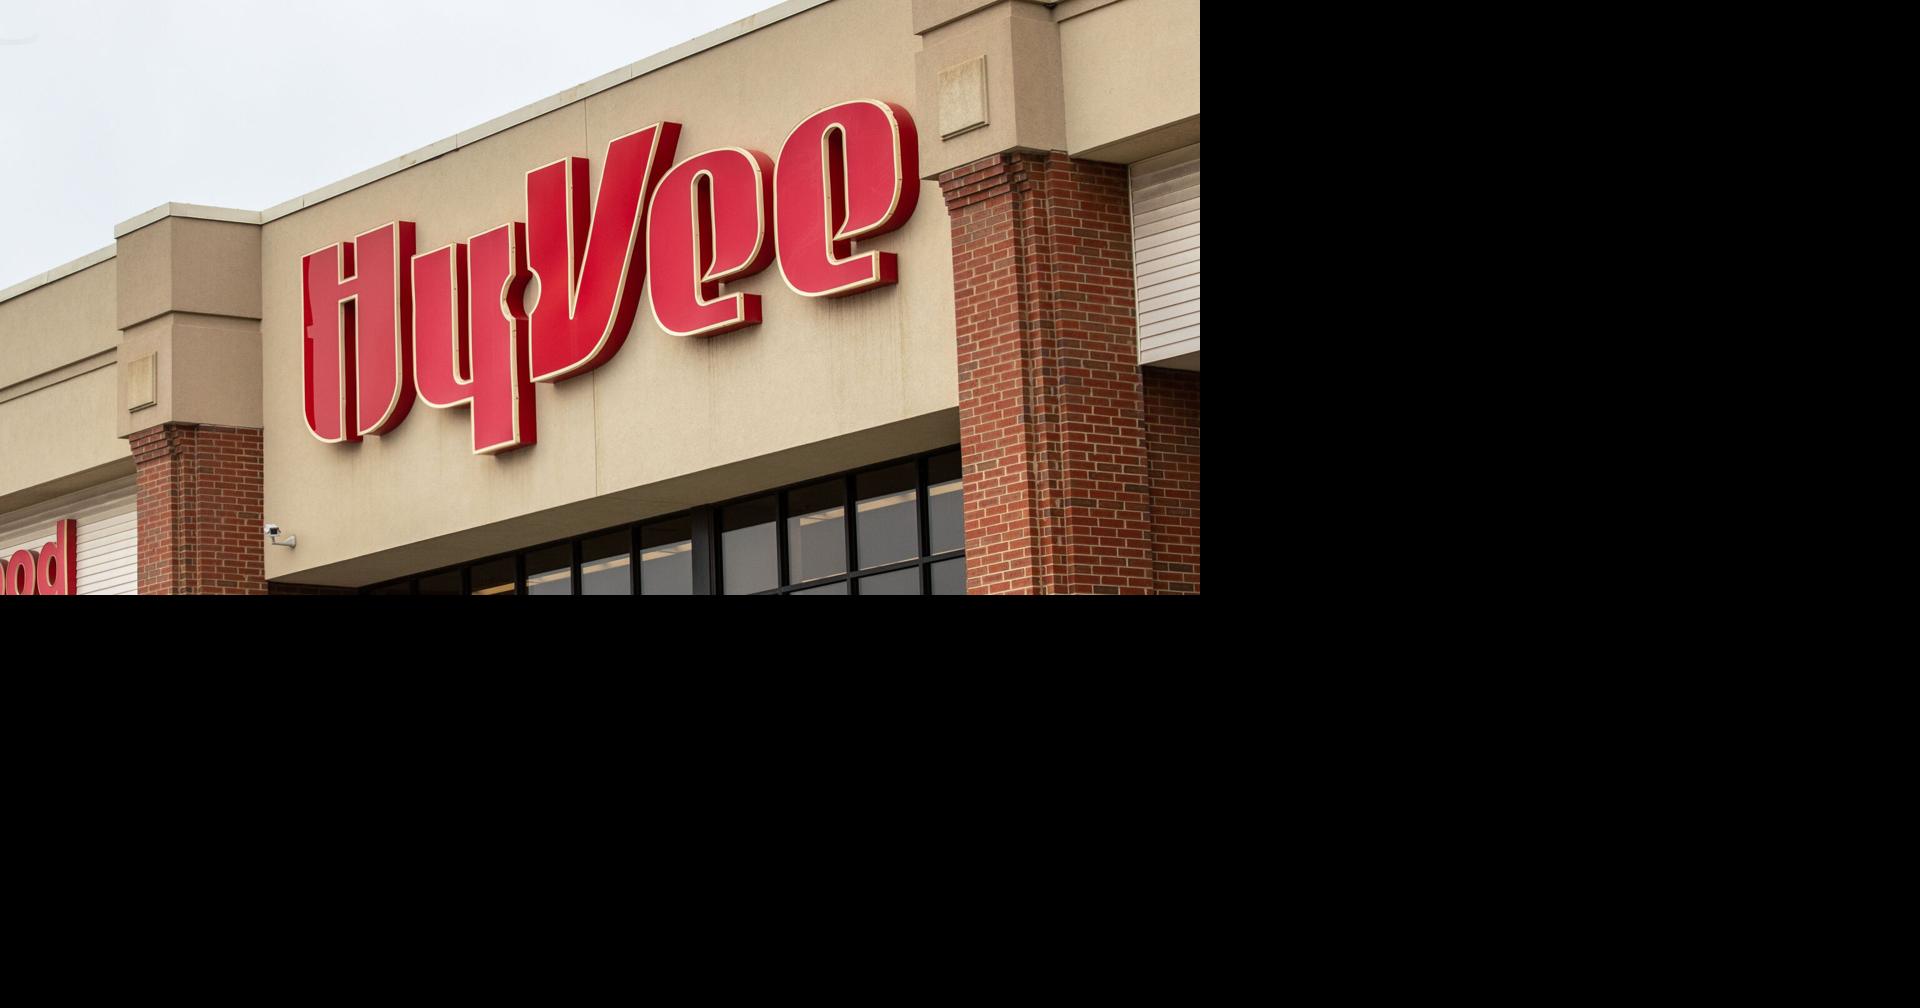 HyVee aims to open Gretna store this summer; Culver's eyeing site, too